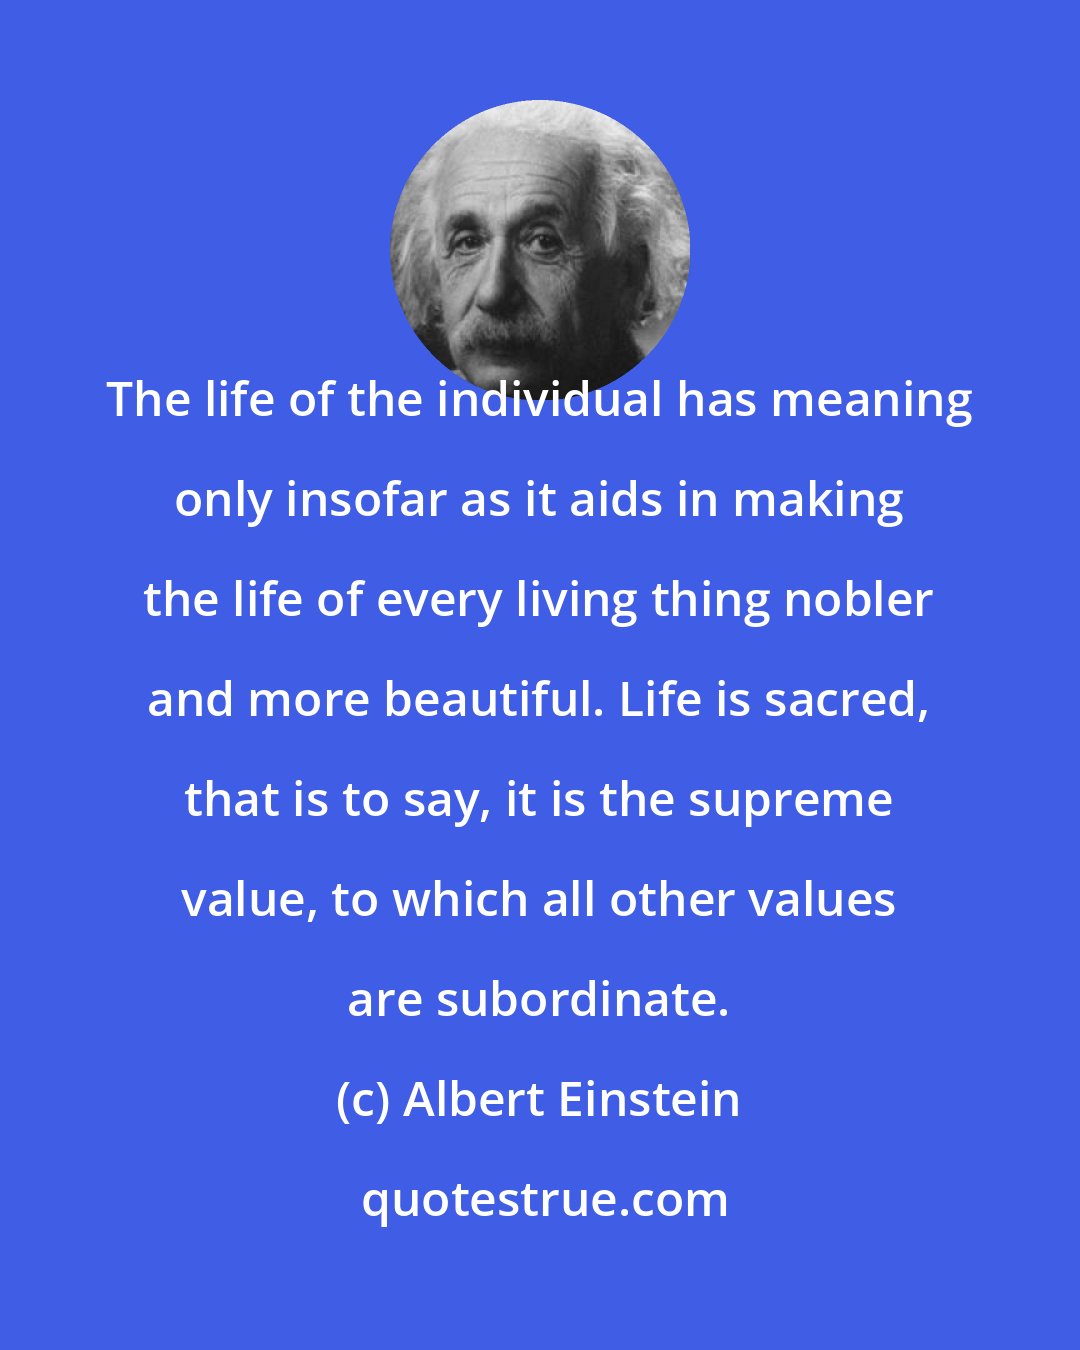 Albert Einstein: The life of the individual has meaning only insofar as it aids in making the life of every living thing nobler and more beautiful. Life is sacred, that is to say, it is the supreme value, to which all other values are subordinate.